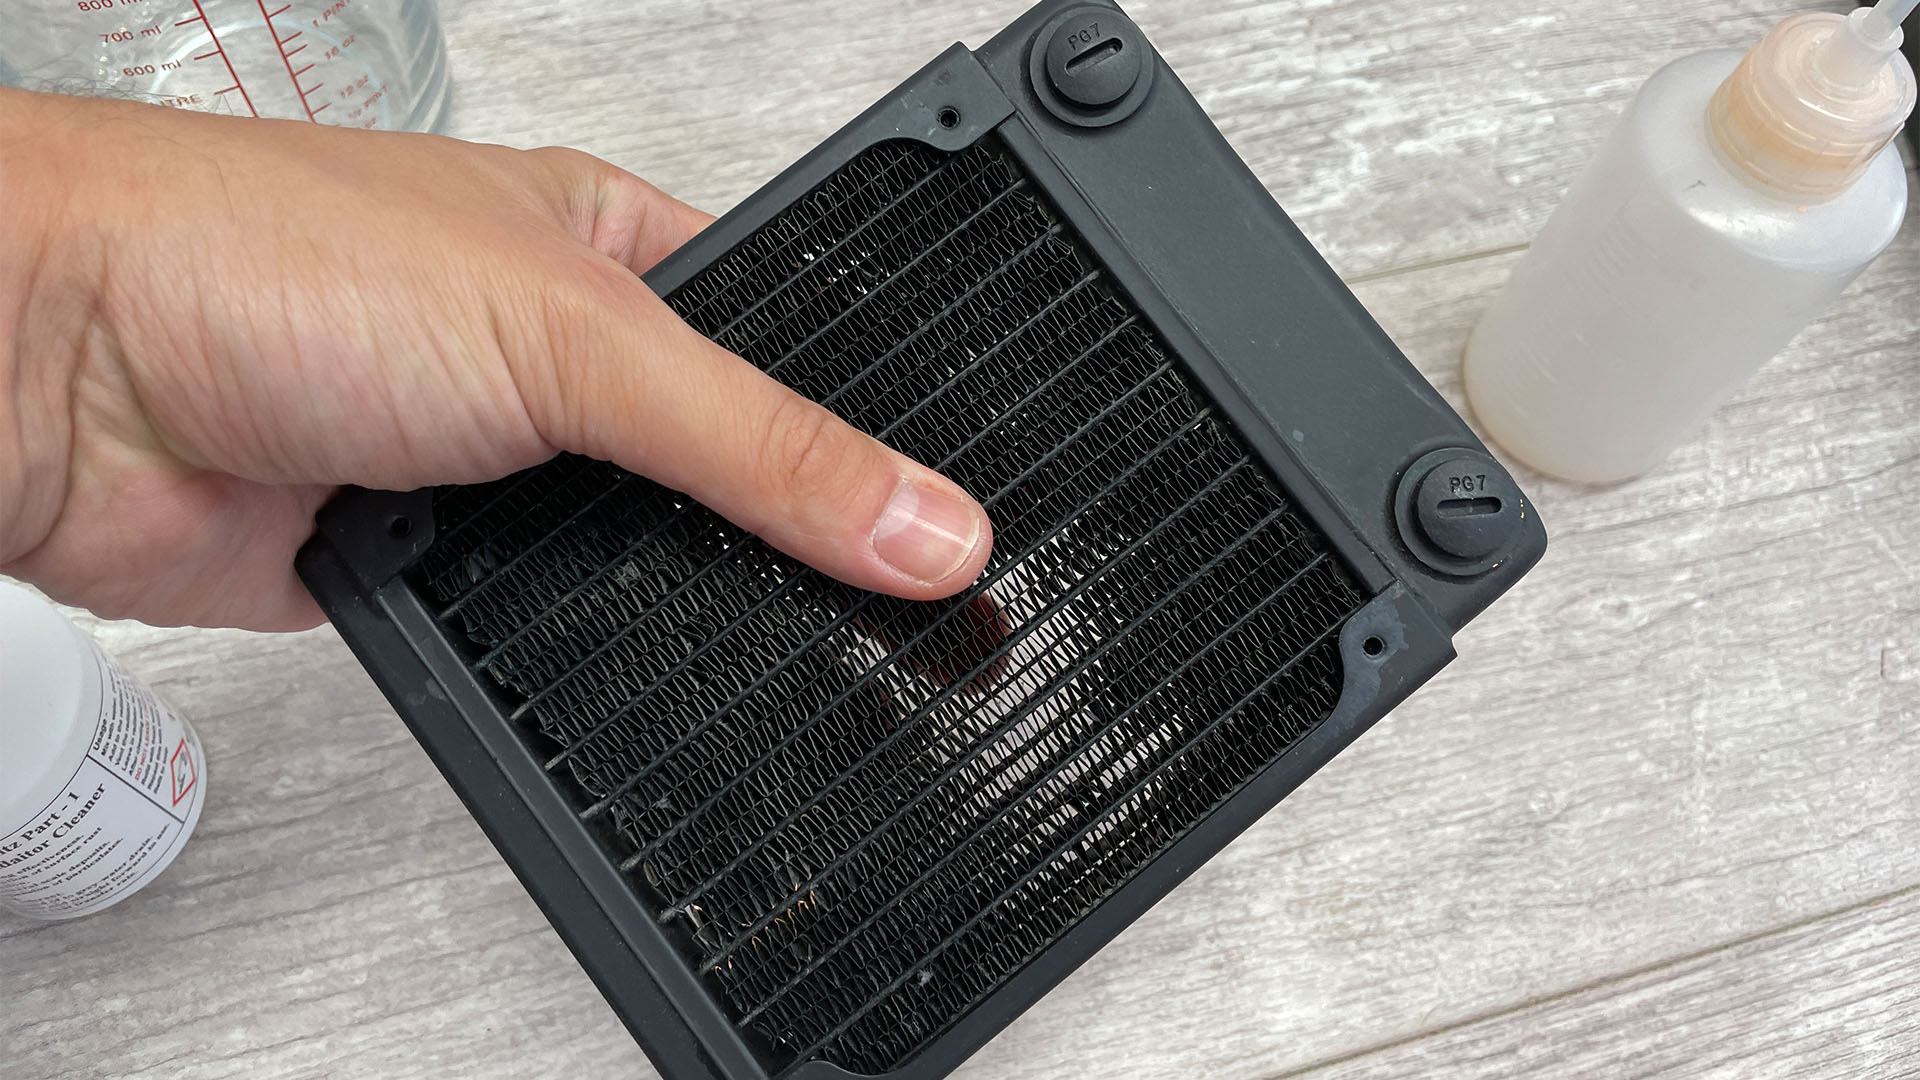 Shaking a water-cooling radiator to clean it